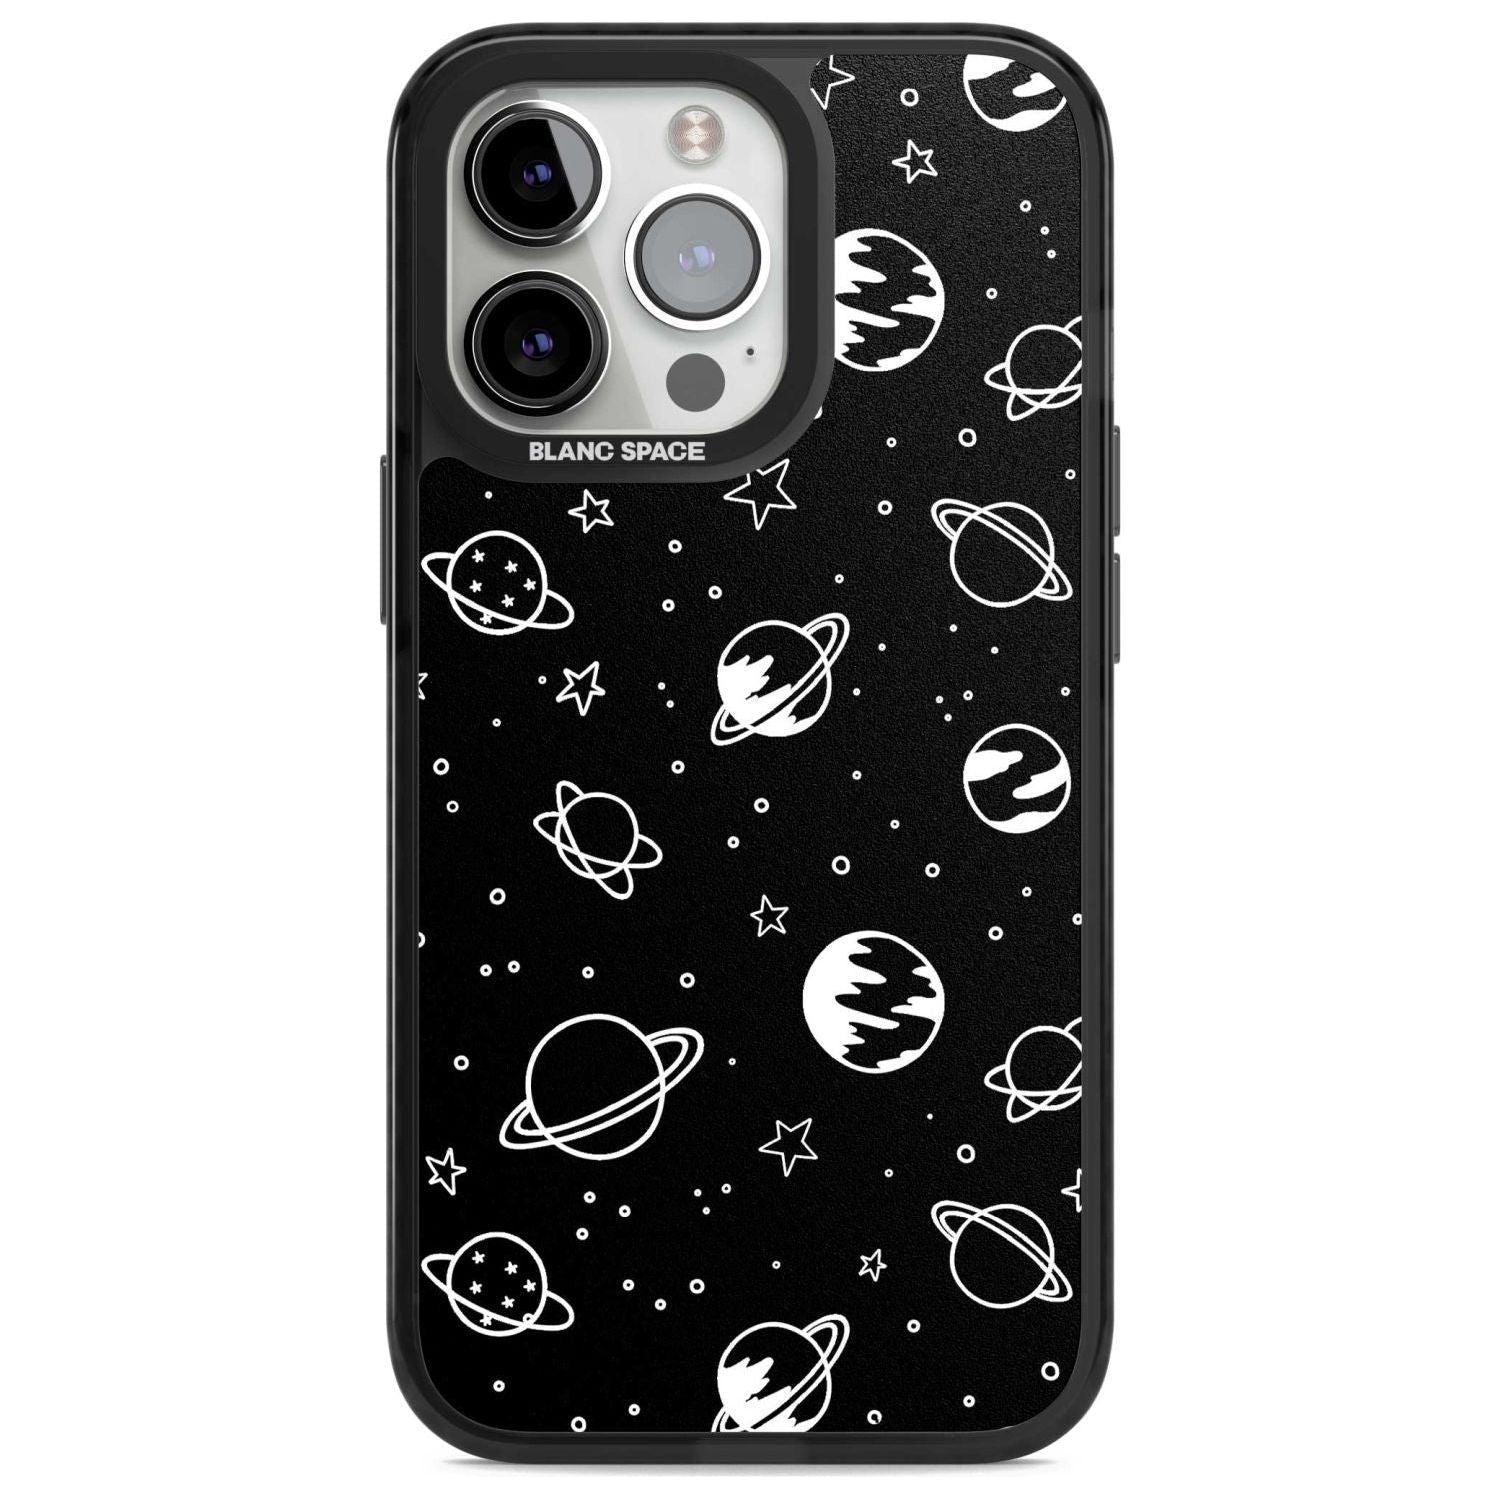 Cosmic Outer Space Design White on Black Phone Case iPhone 15 Pro Max / Magsafe Black Impact Case,iPhone 15 Pro / Magsafe Black Impact Case,iPhone 14 Pro Max / Magsafe Black Impact Case,iPhone 14 Pro / Magsafe Black Impact Case,iPhone 13 Pro / Magsafe Black Impact Case Blanc Space